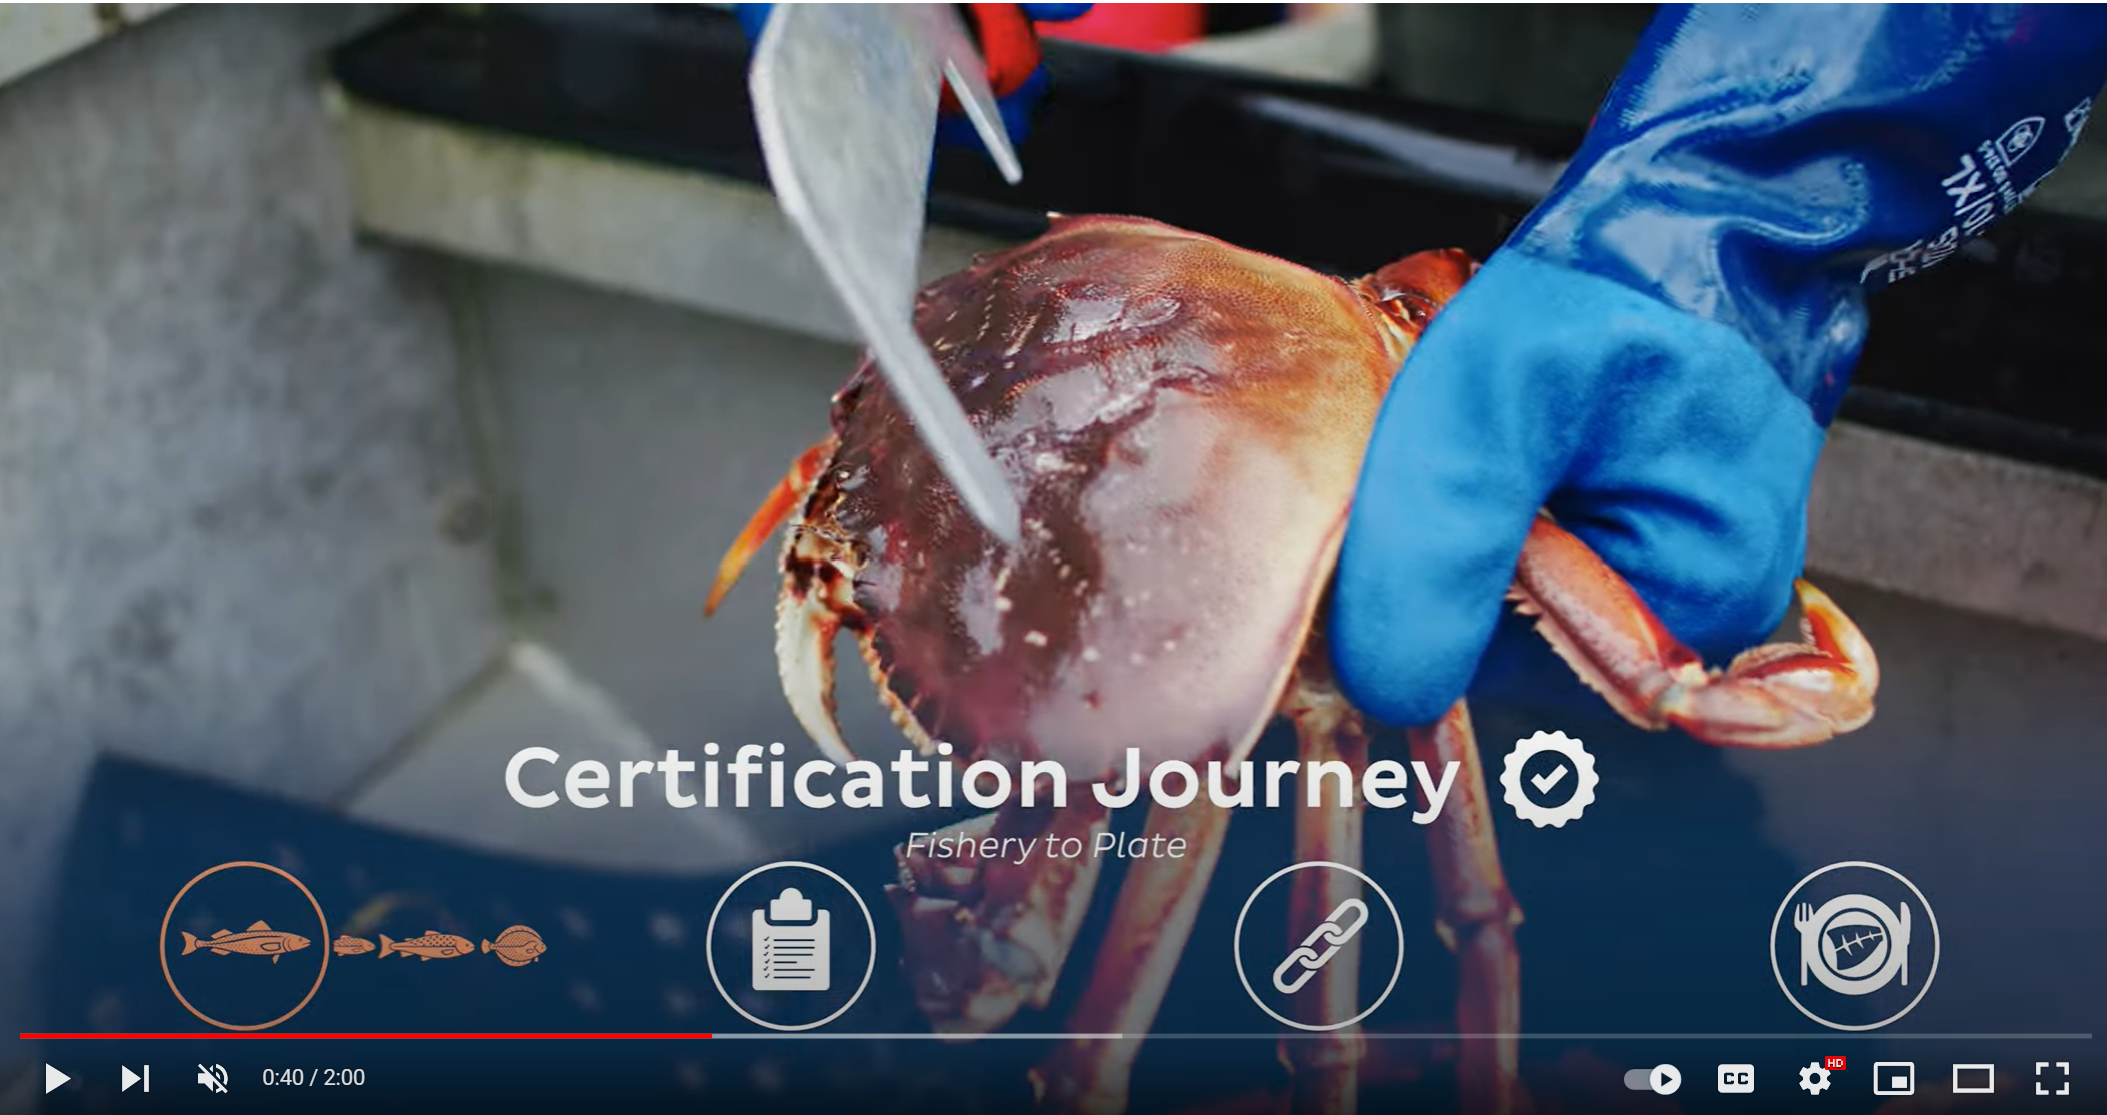 Alaska Seafood’s Sustainability Story in Video: Certification